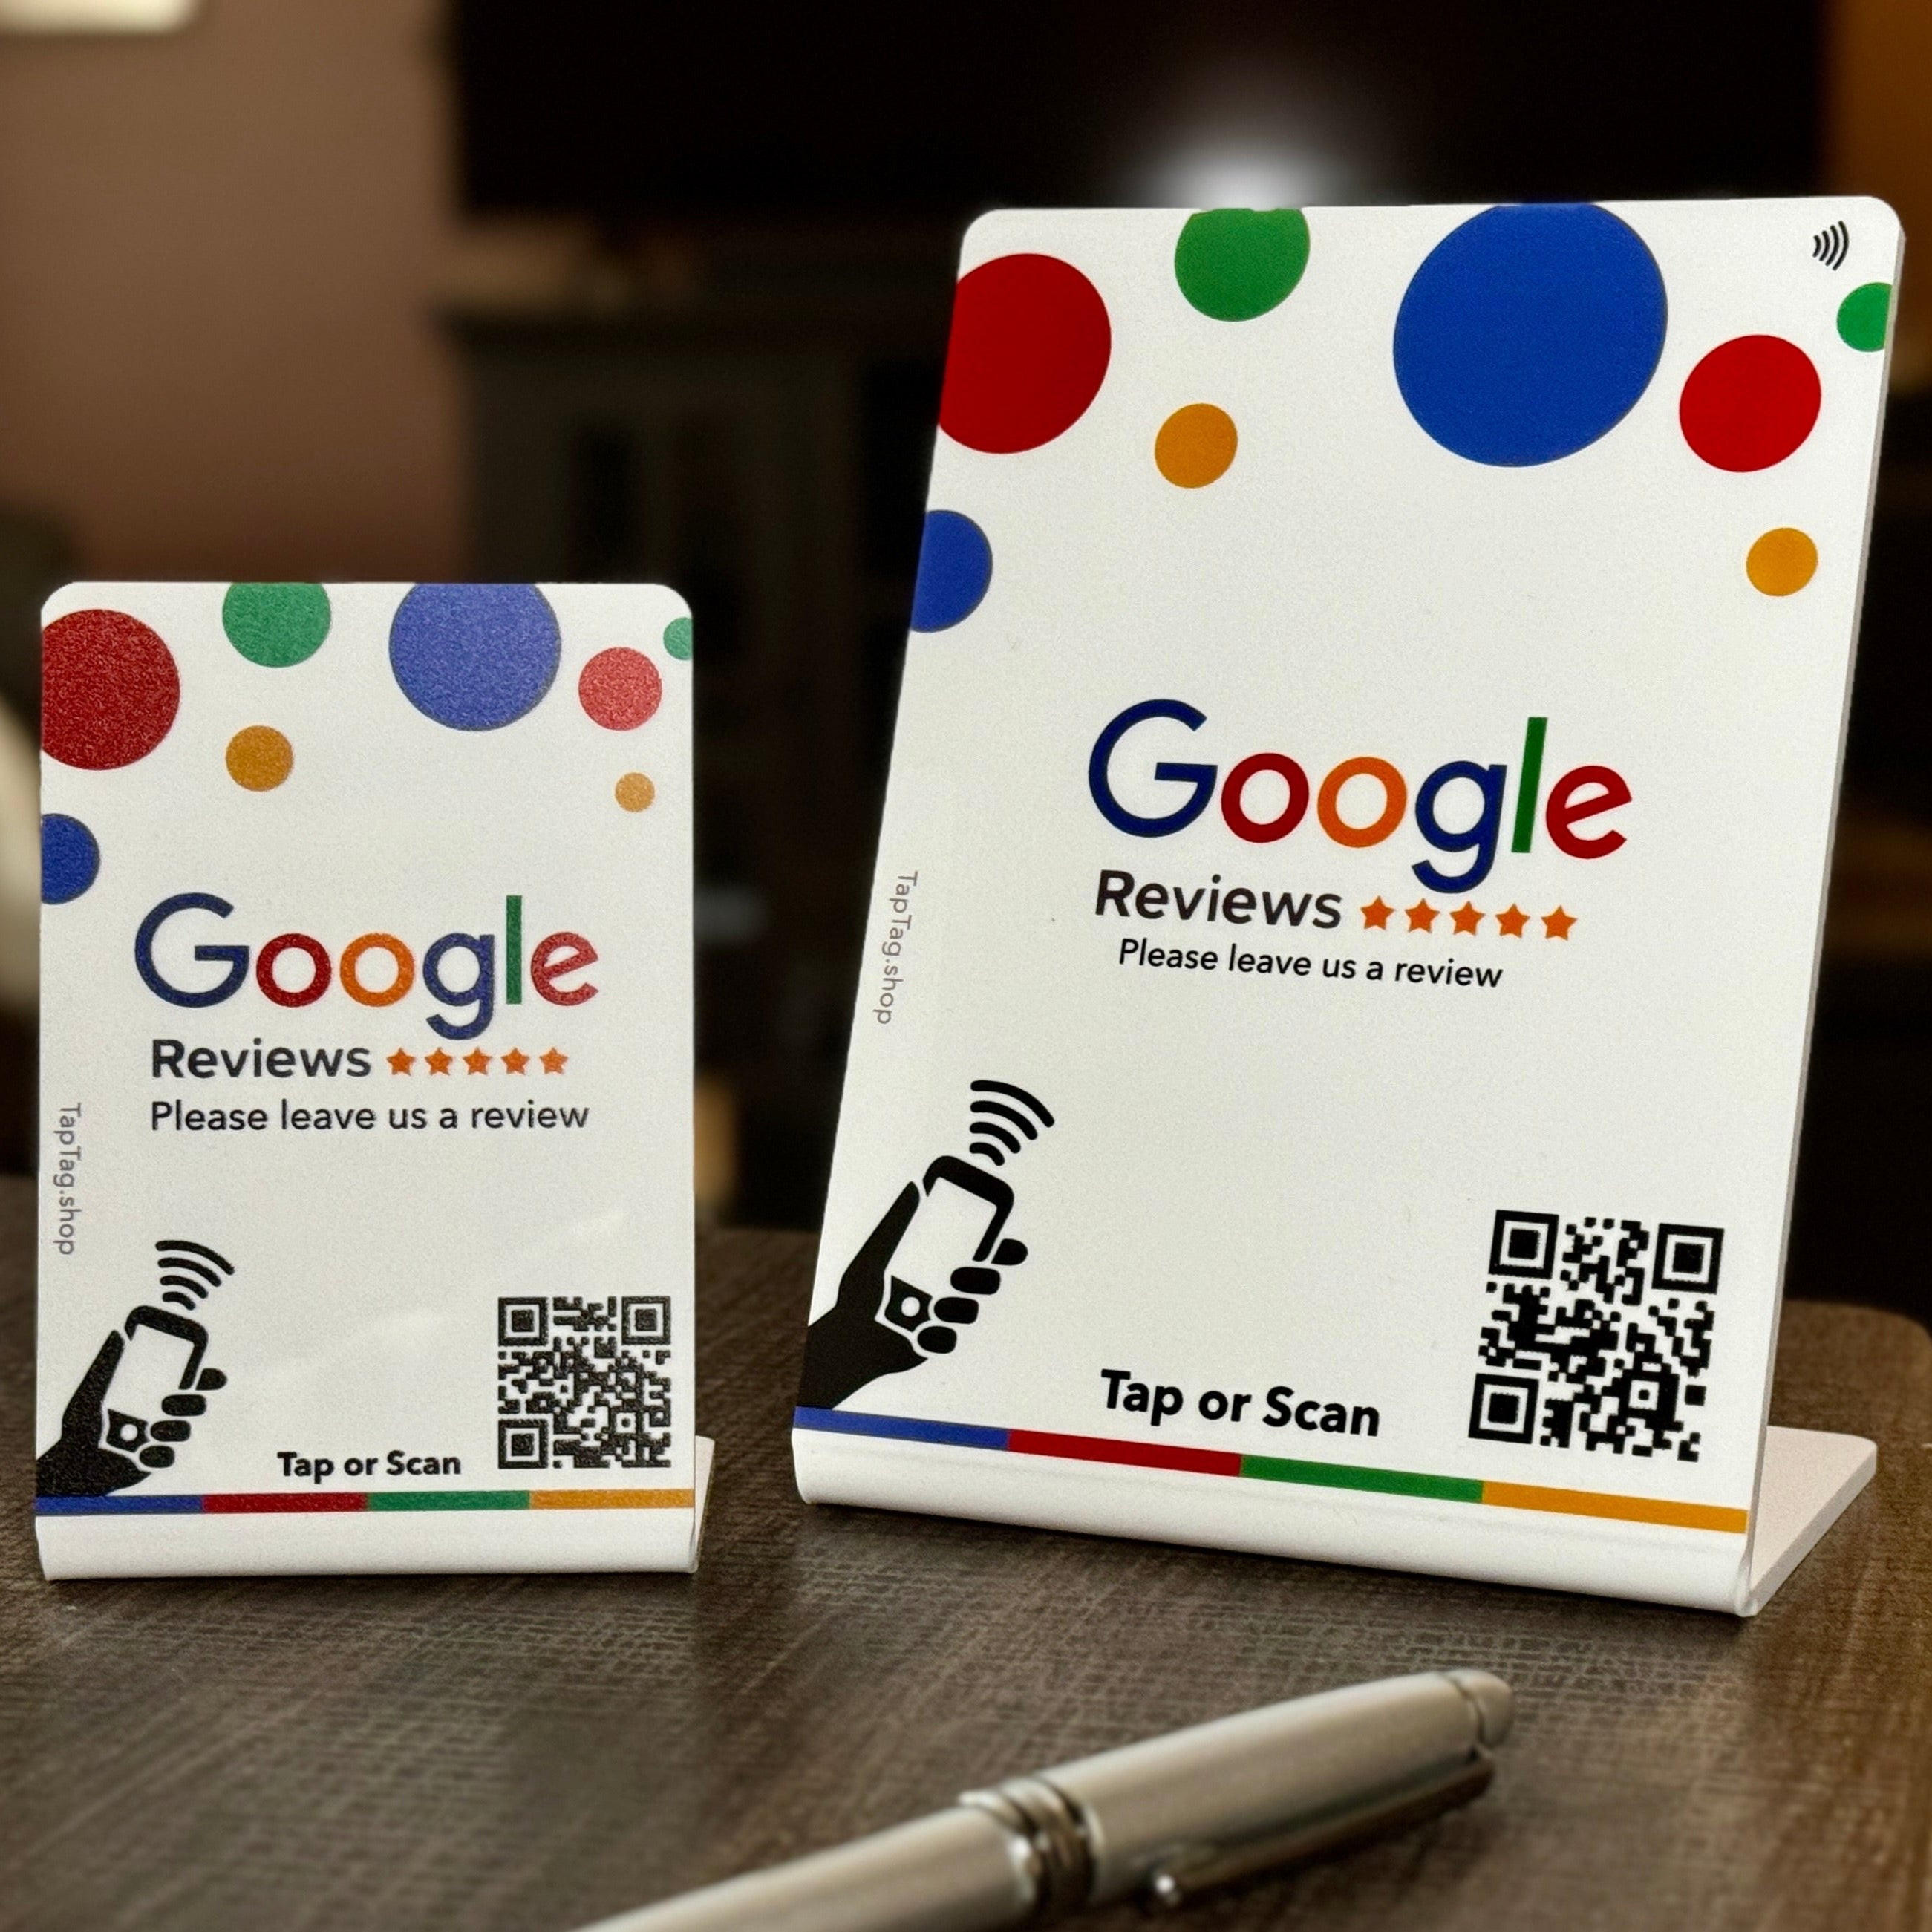 Standup google tap review counter sign with NFC and QR